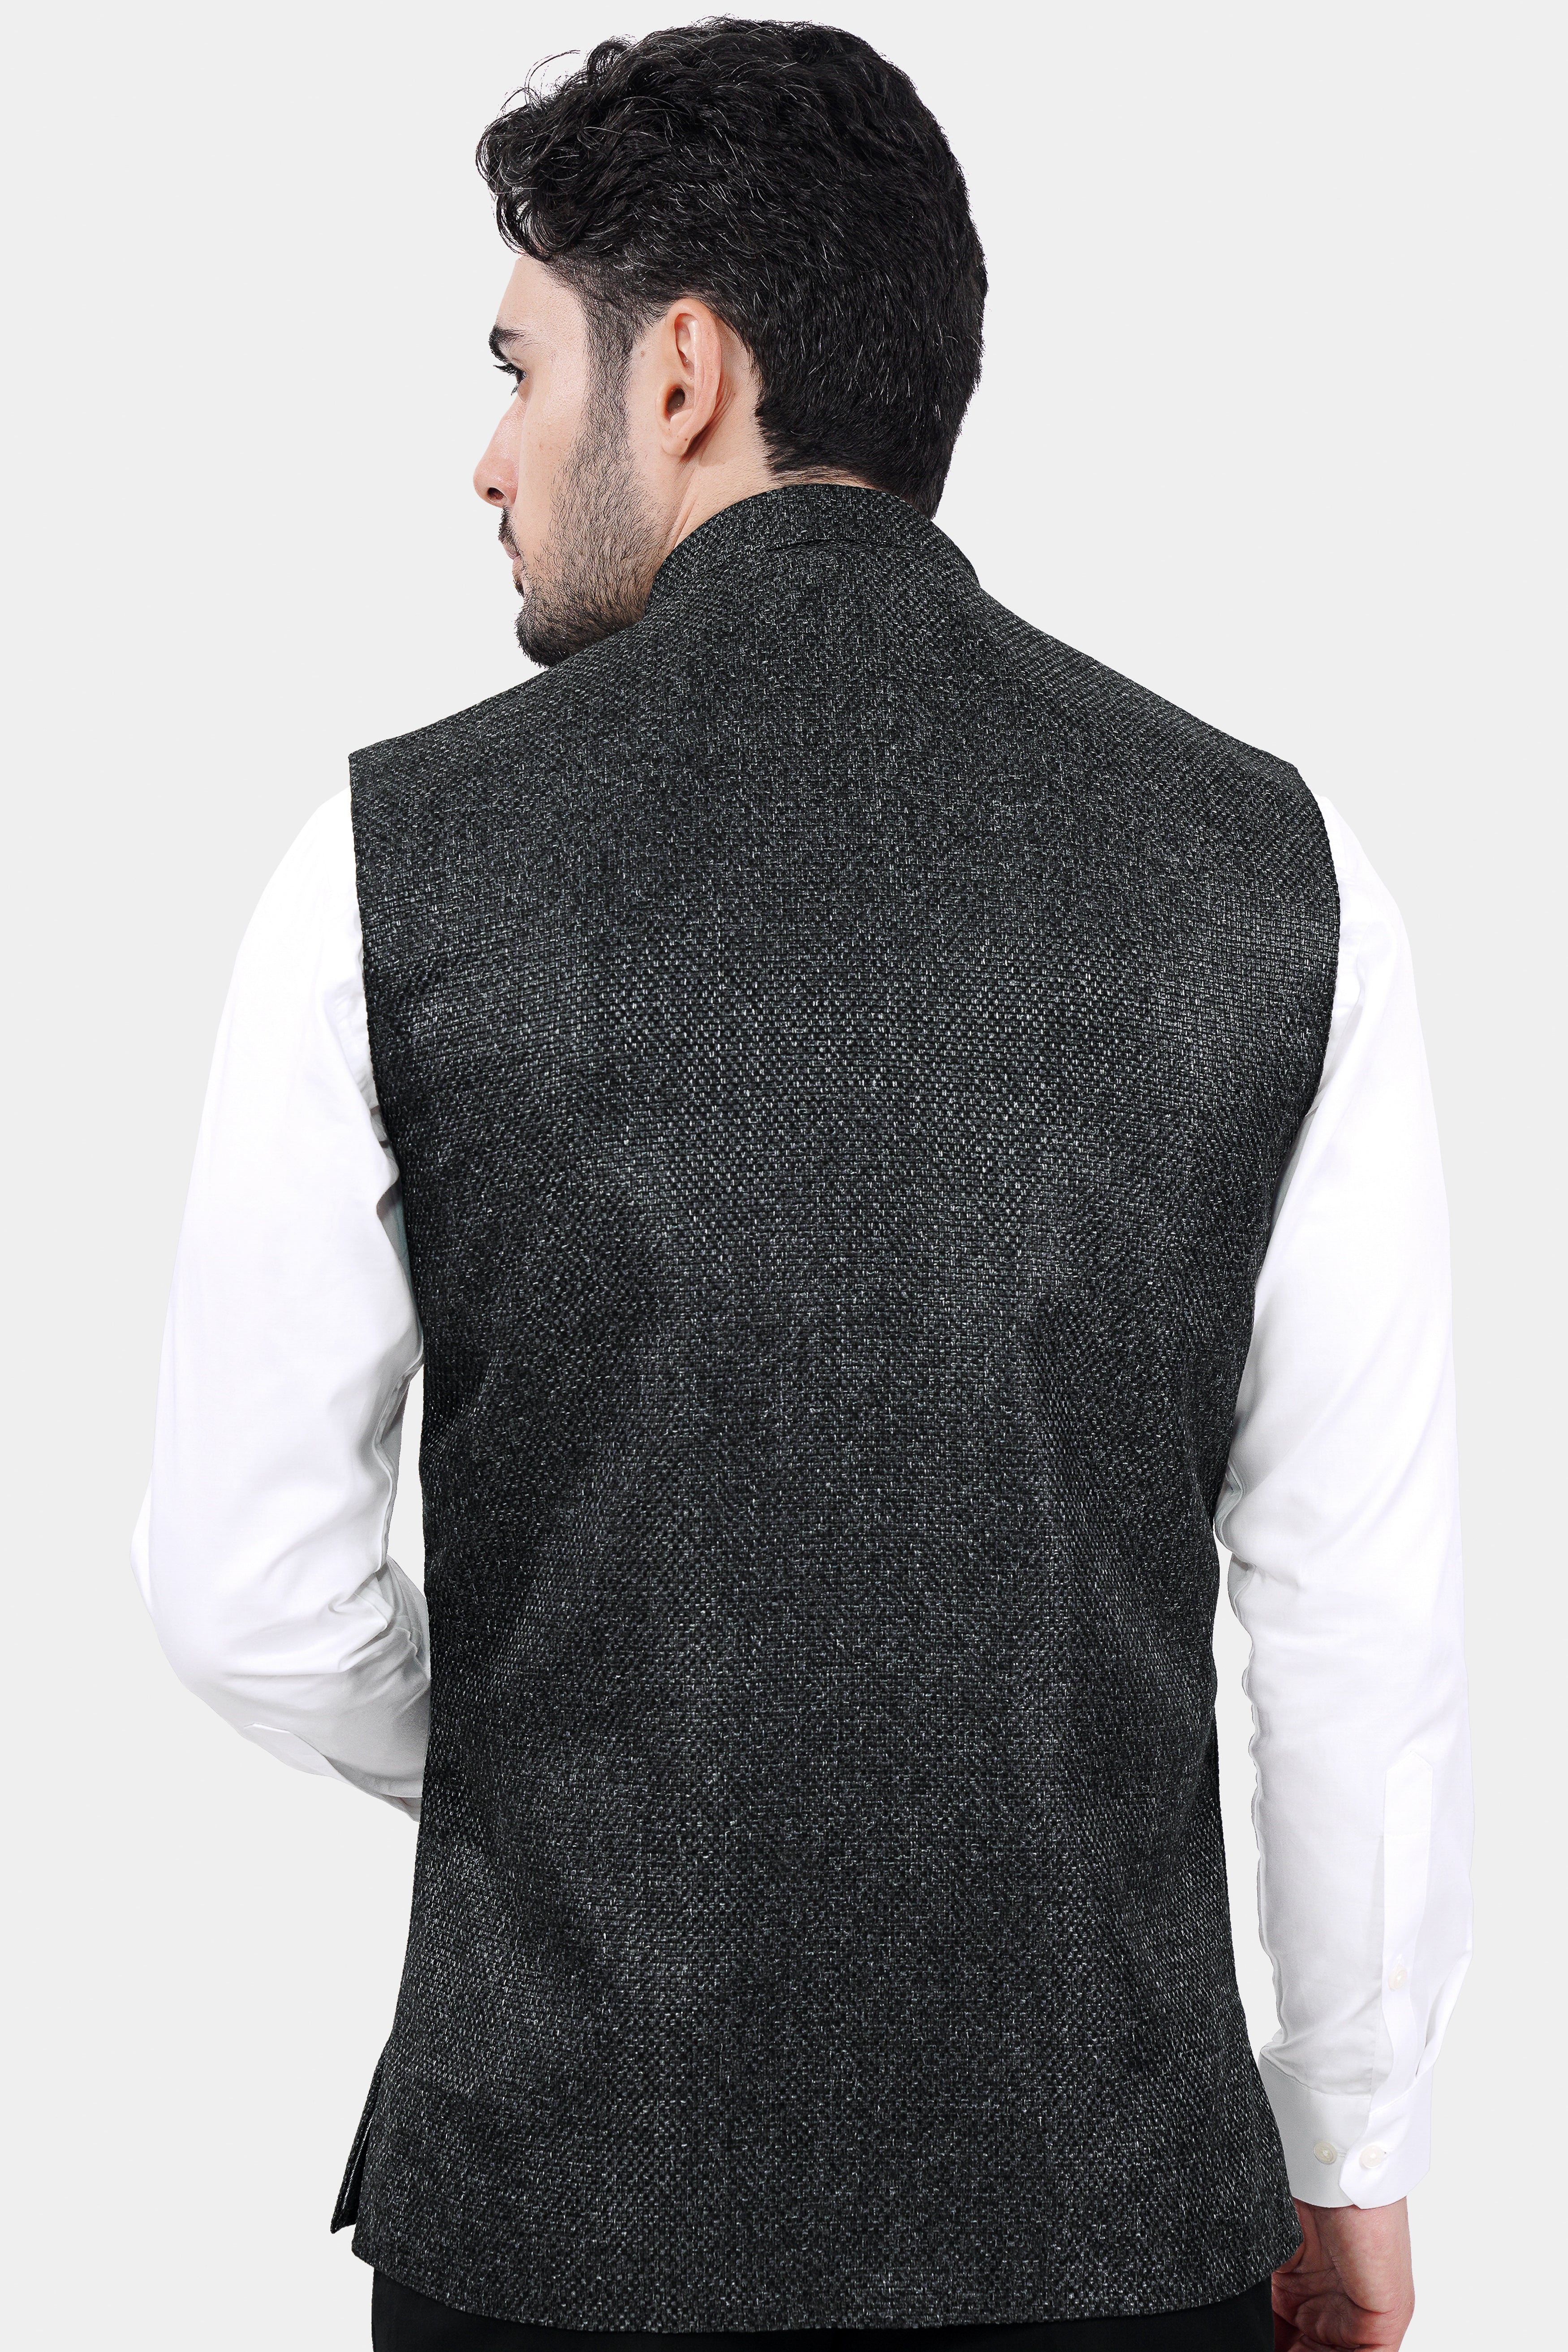 Arsenic Gray Woolrich Single Breasted Nehru Jacket WC3030-36, WC3030-38, WC3030-40, WC3030-42, WC3030-44, WC3030-46, WC3030-48, WC3030-50, WC3030-52, WC3030-54, WC3030-56, WC3030-58, WC3030-60